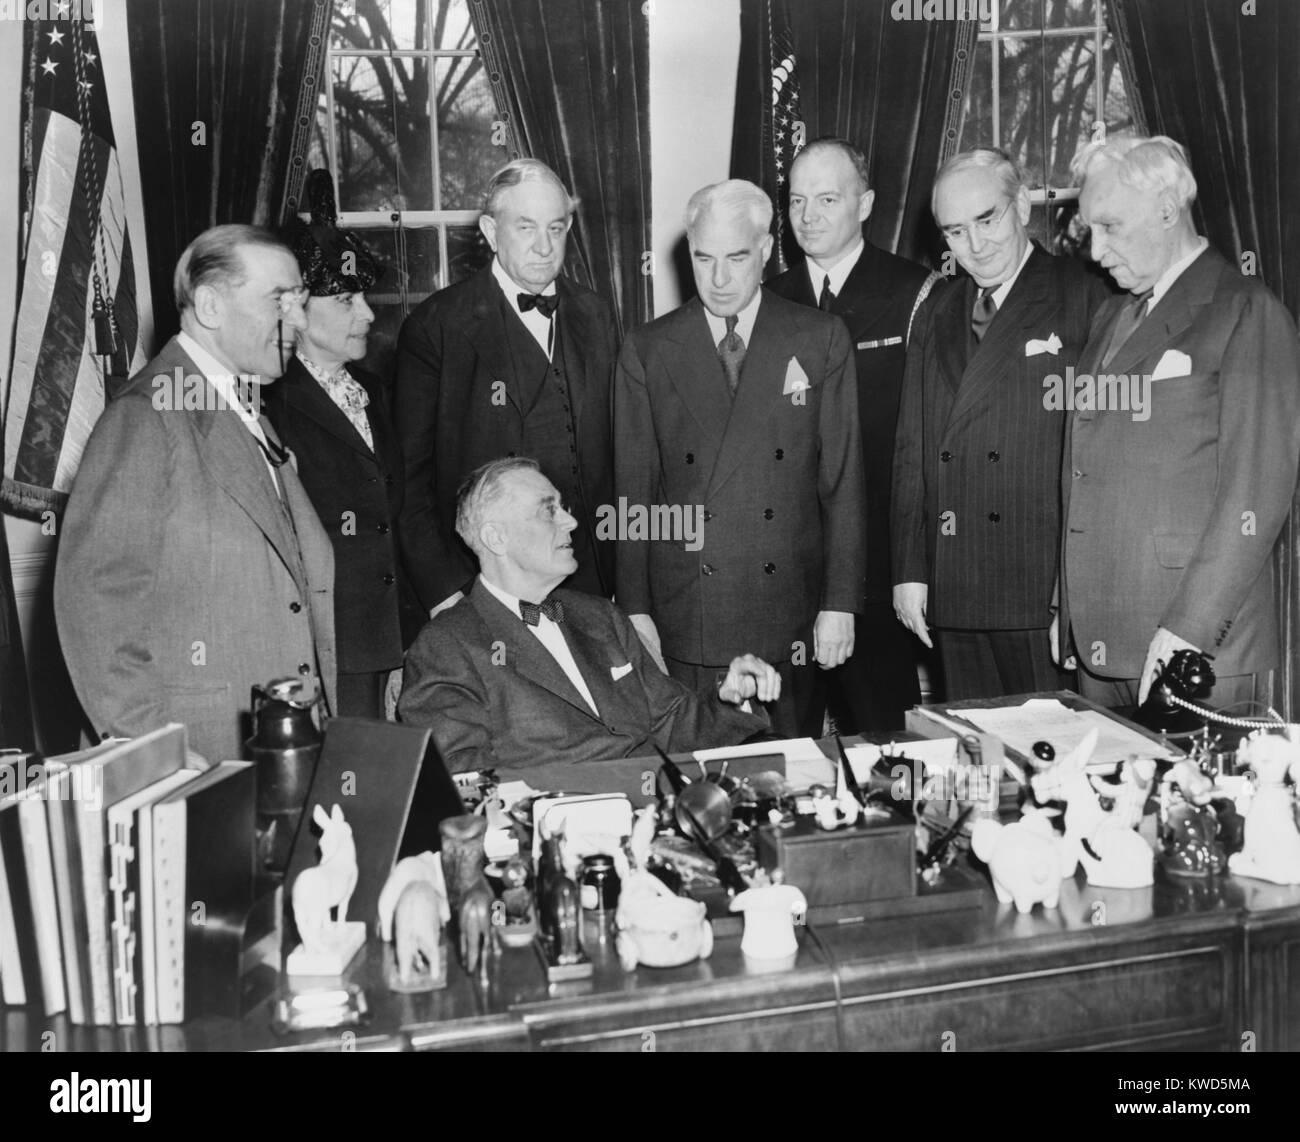 President Roosevelt, meets U.S. delegates to United Nations conference in San Francisco. L-R: Rep. Sol Bloom; Dean Virginia Gildersleeve; Sen. Tom Connally; Secretary of State Edward Stettinius; Comdr. Harold Stassen; Sen. Arthur Vandenberg; and Rep. Charles A. Eaton. Ca. March 1945. (BSLOC 2014 13 23) Stock Photo